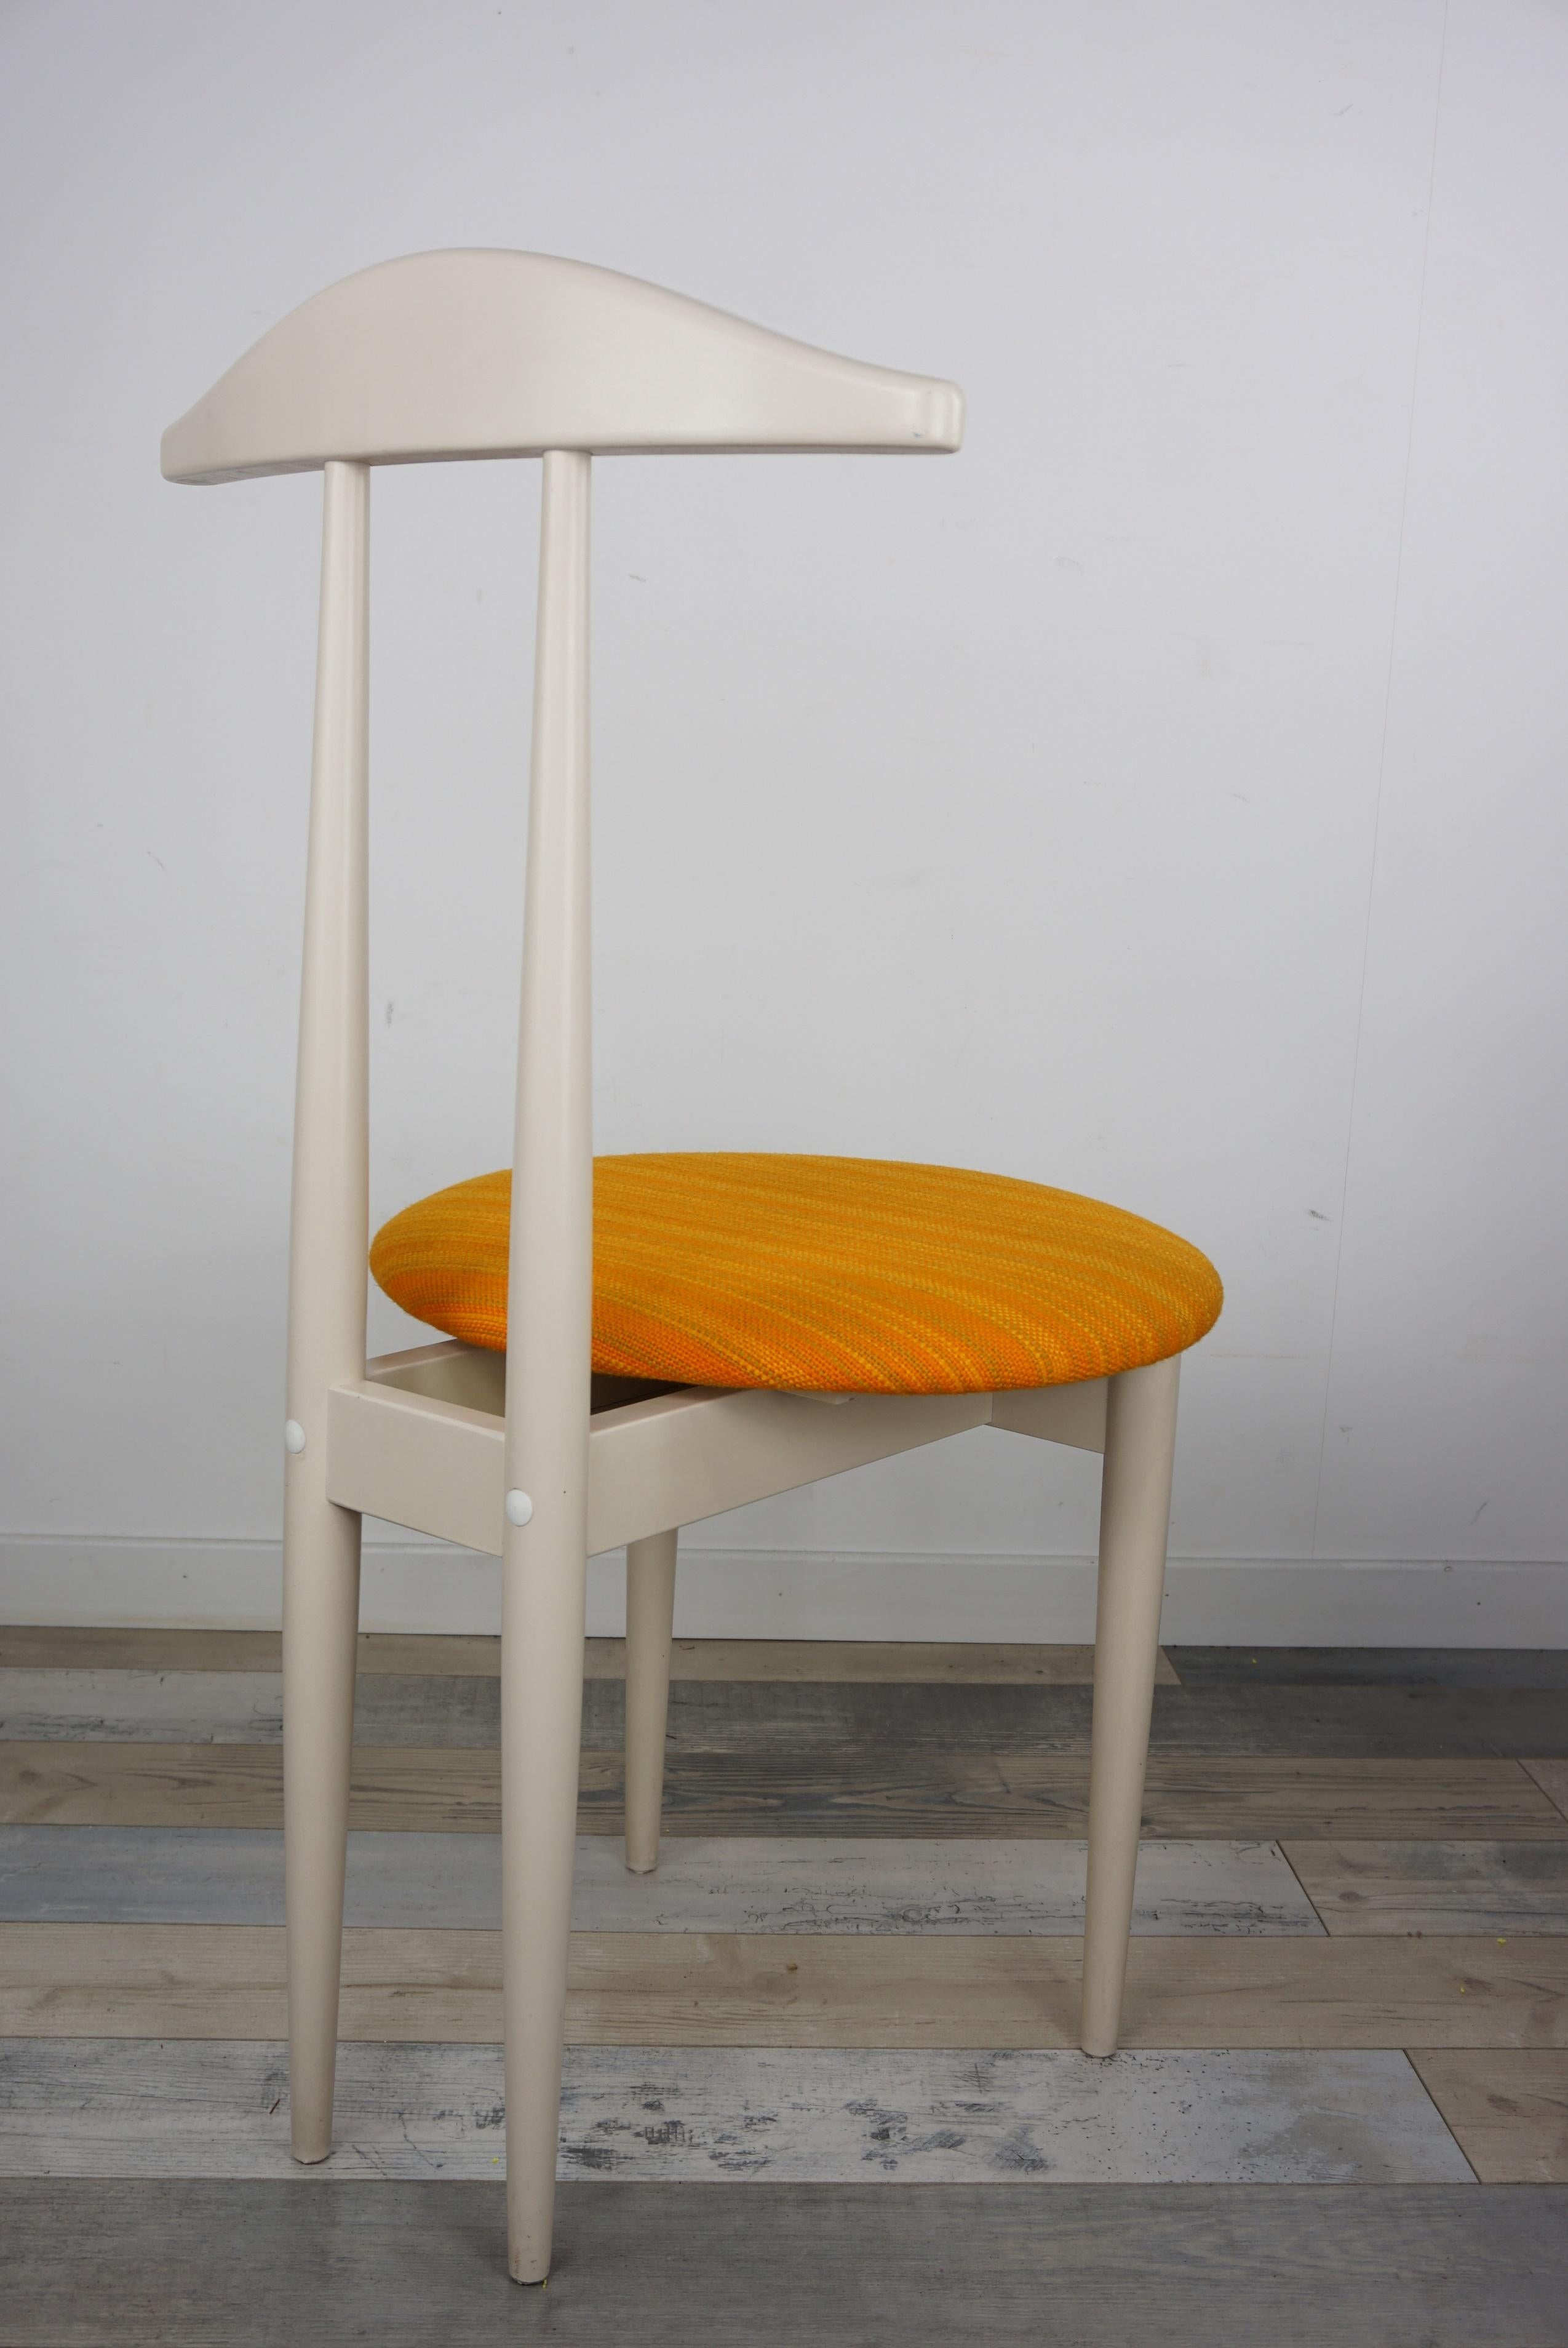 Ivory satin wood chair and seat (height 43cm) round fabric Seventies and Pop! Original, ingenious and super practical, it hides its game well by concealing, in its seat, a small storage space where you can hide, neither seen nor known, your most